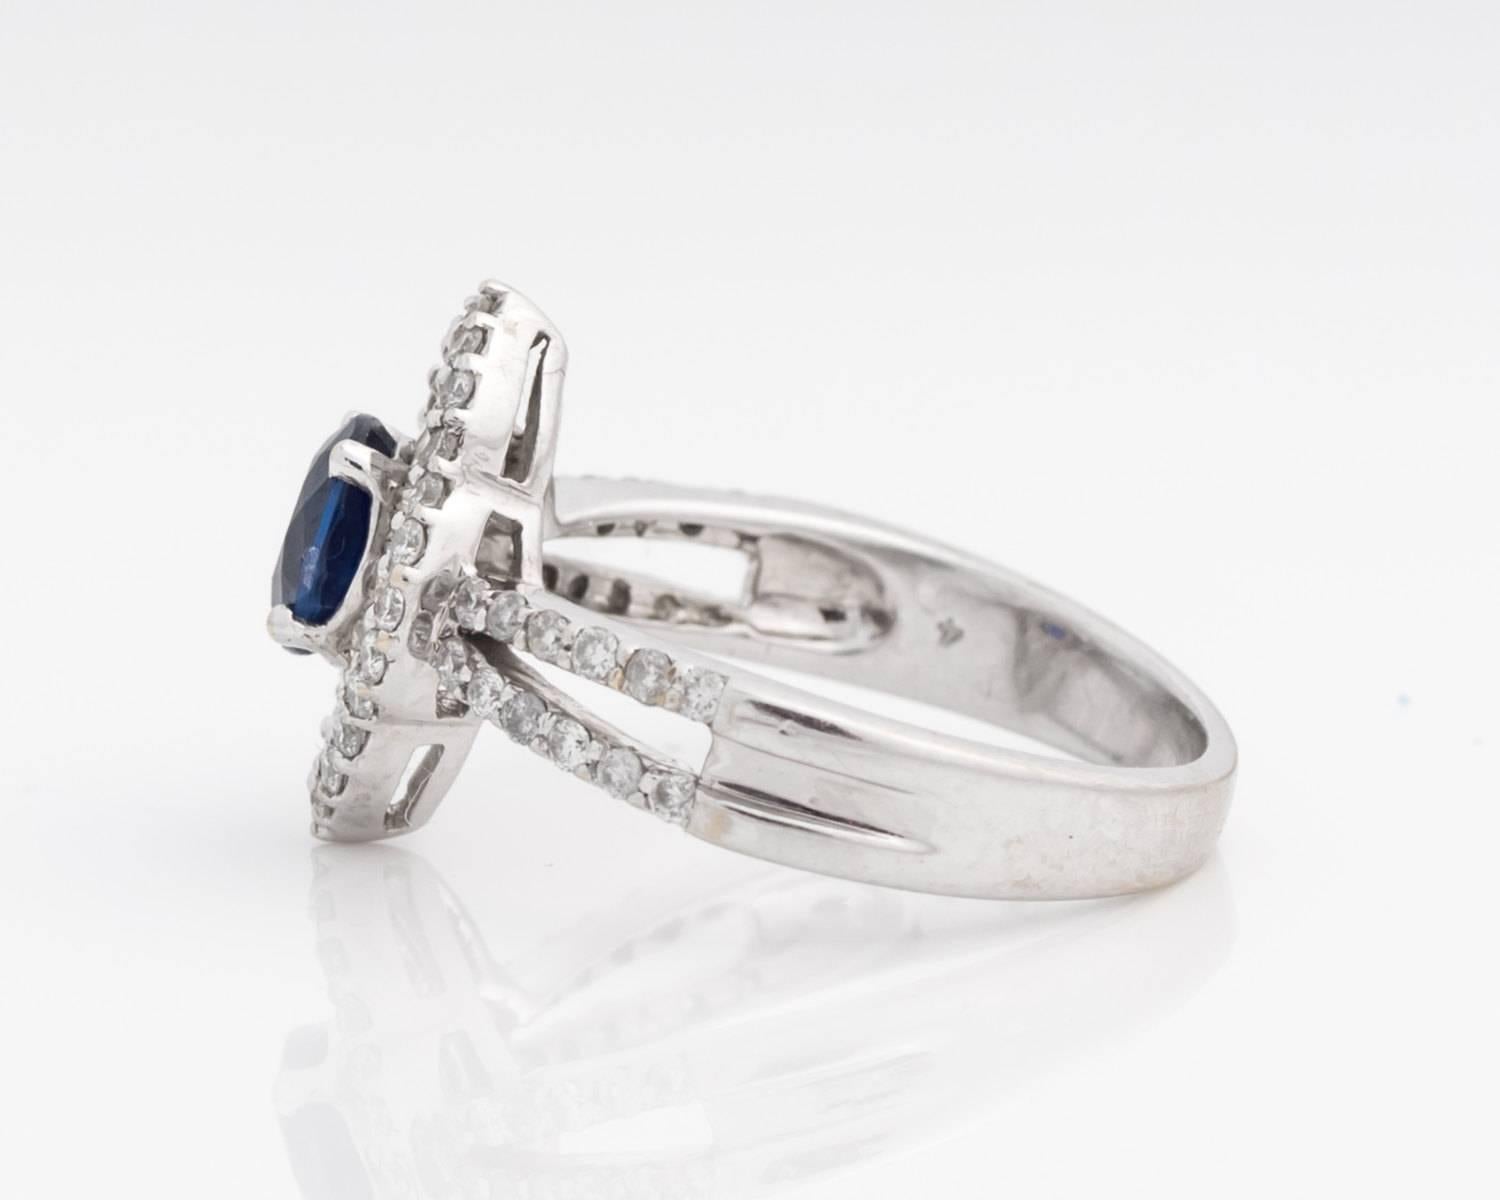 Brand new custom made ring made in house! The ring is completely new and has never been worn before. This is a great option for an engagement ring, sapphire September birthstone gift, or fanciful cocktail ring! The deep blue sapphire is a natural